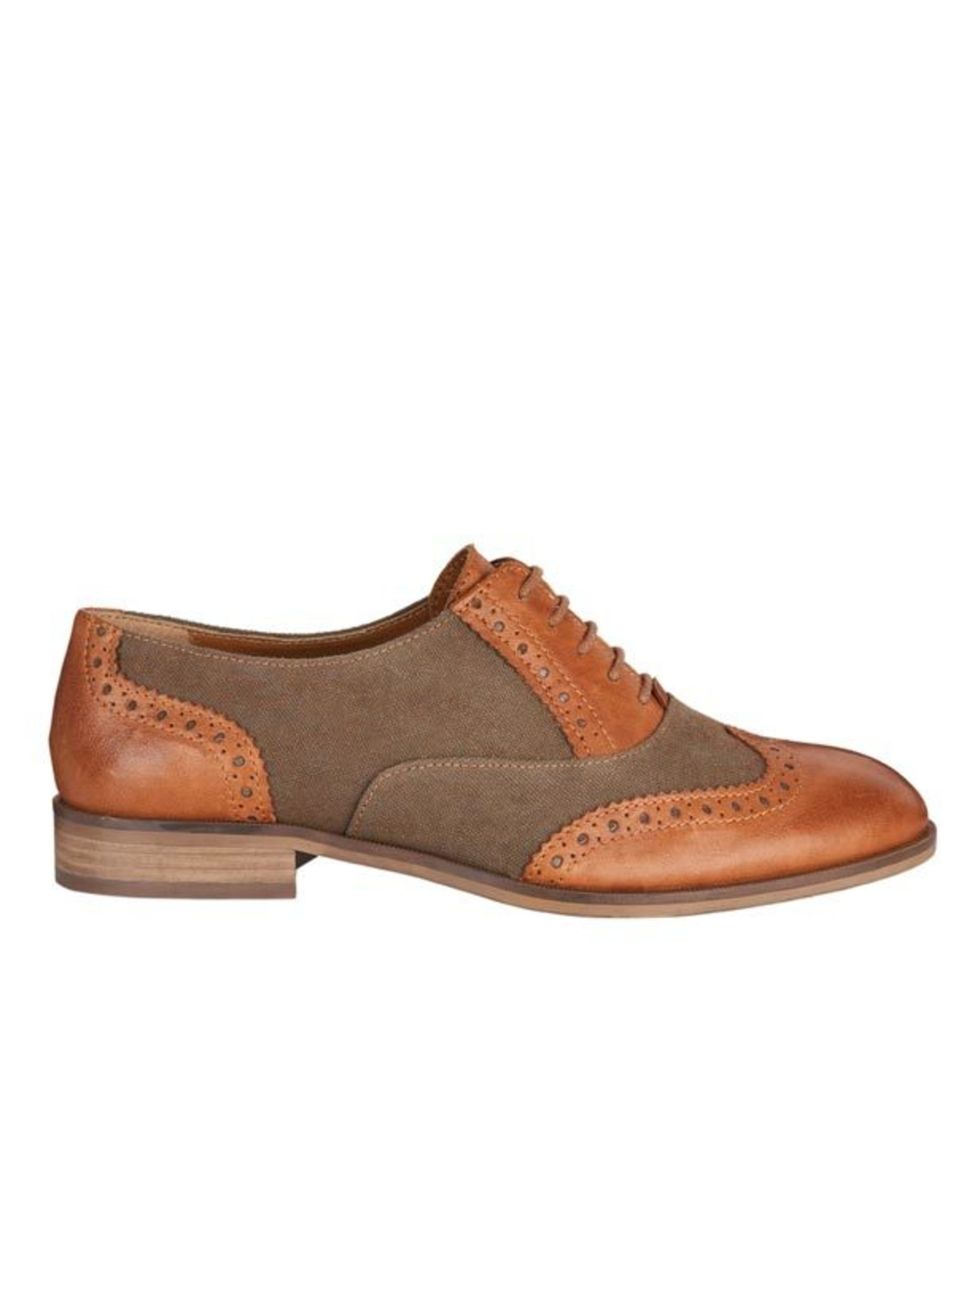 <p>With jeans or tea dresses, brogues are essential spring footwear. This canvas and leather pair will prove a smart buy <a href="http://www.jonesbootmaker.com/main/home">Jones Bootmaker</a> brogues, £89</p>